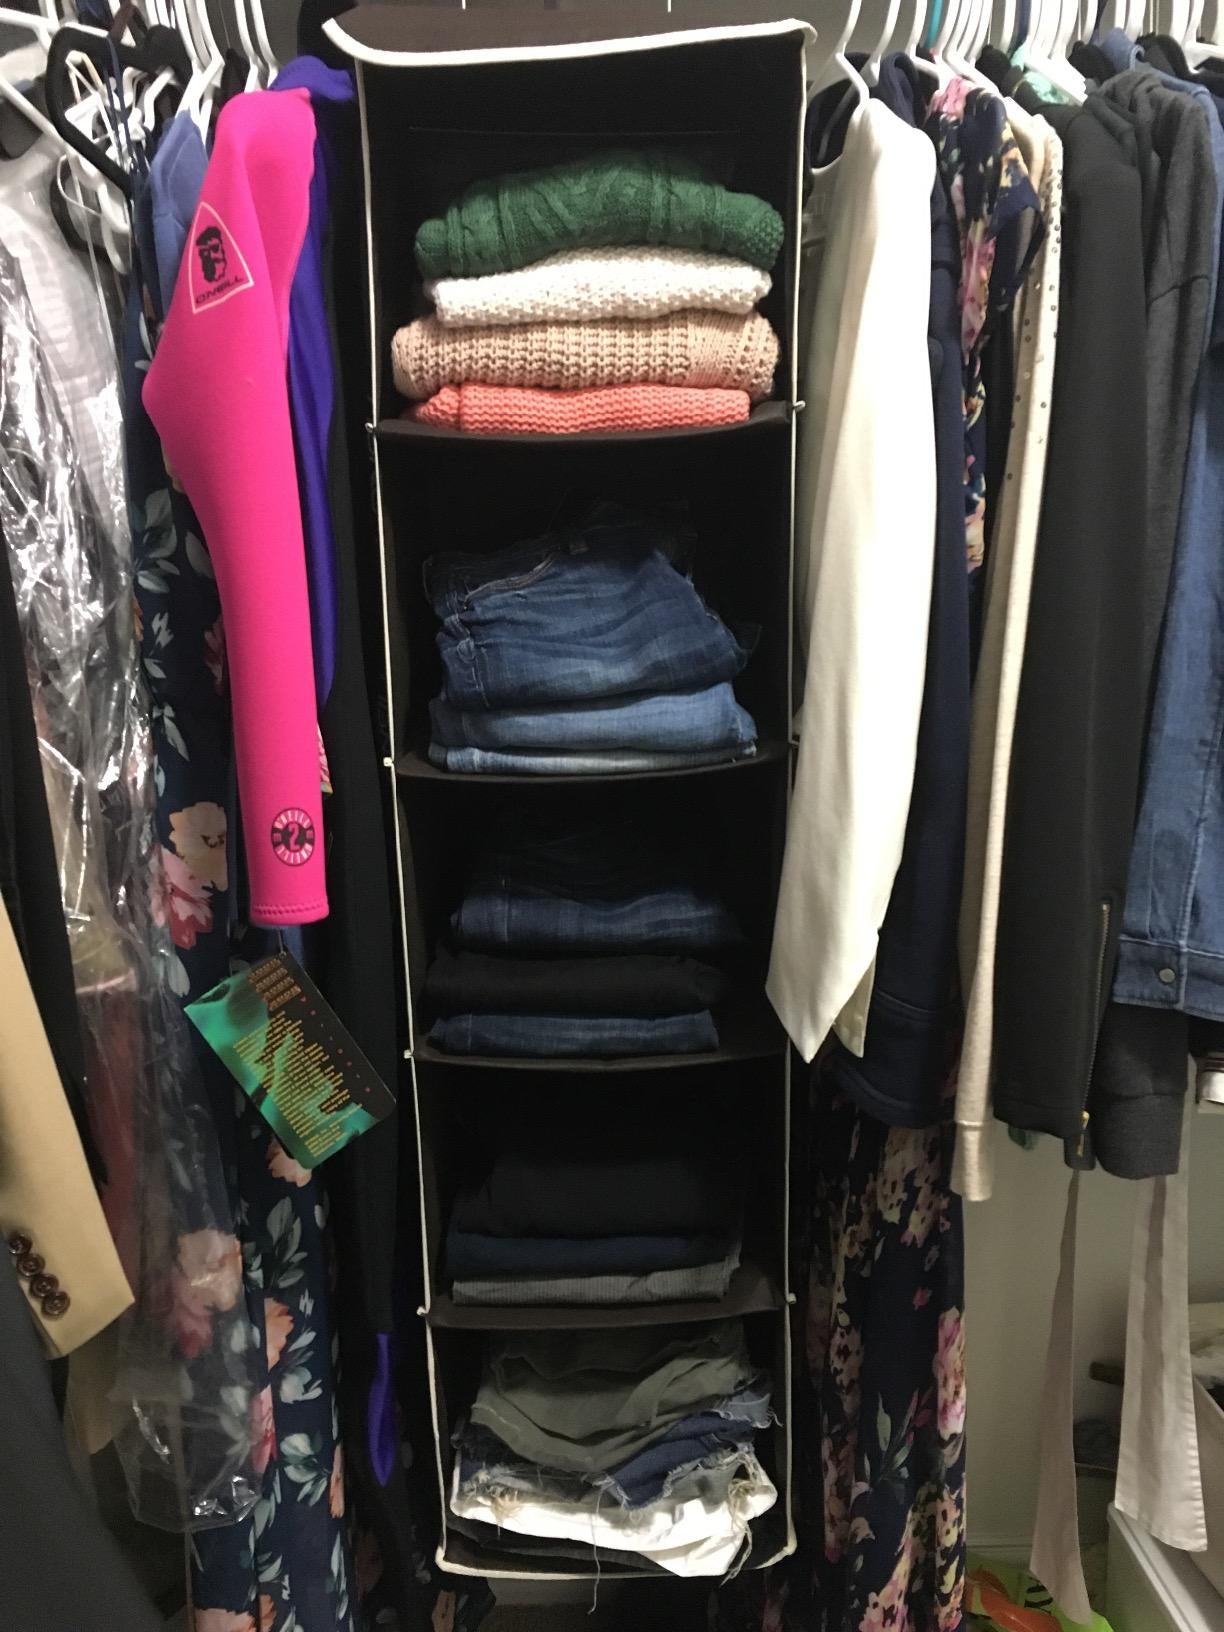 reviewer's closet with organizer in it filled with clothes